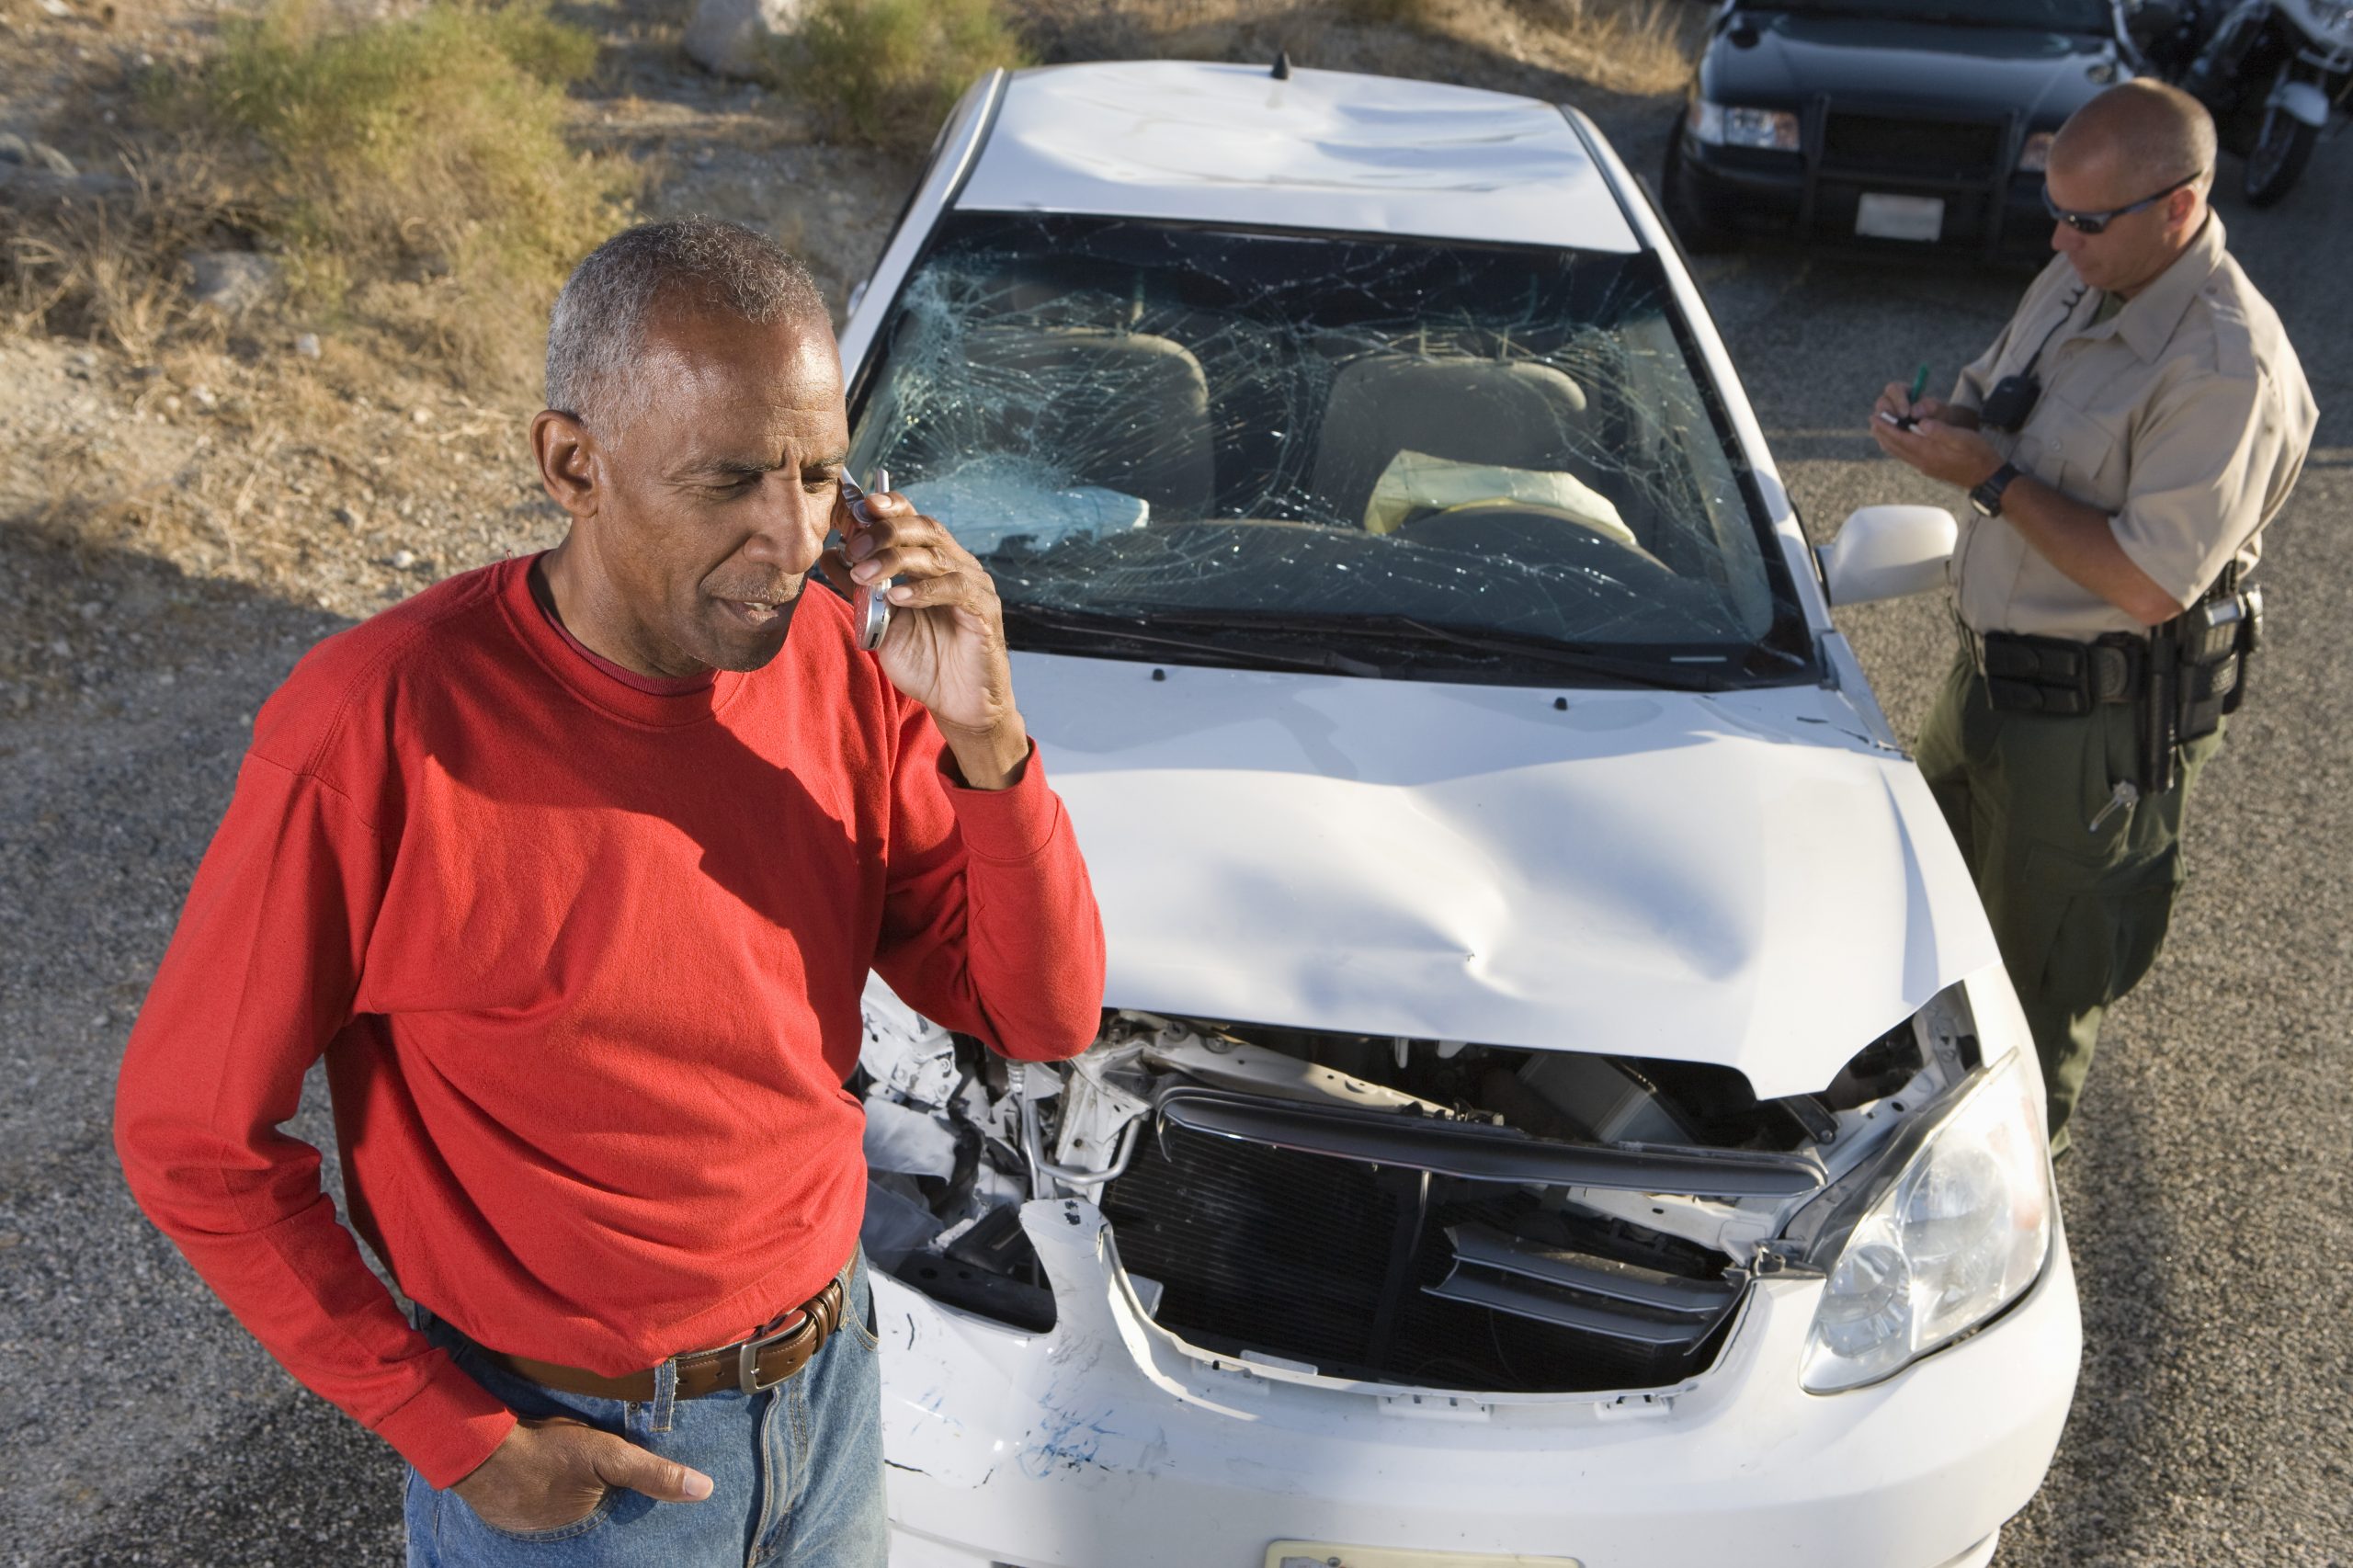 Does a Traffic Ticket Impact An Auto Accident Case? - TorkLaw